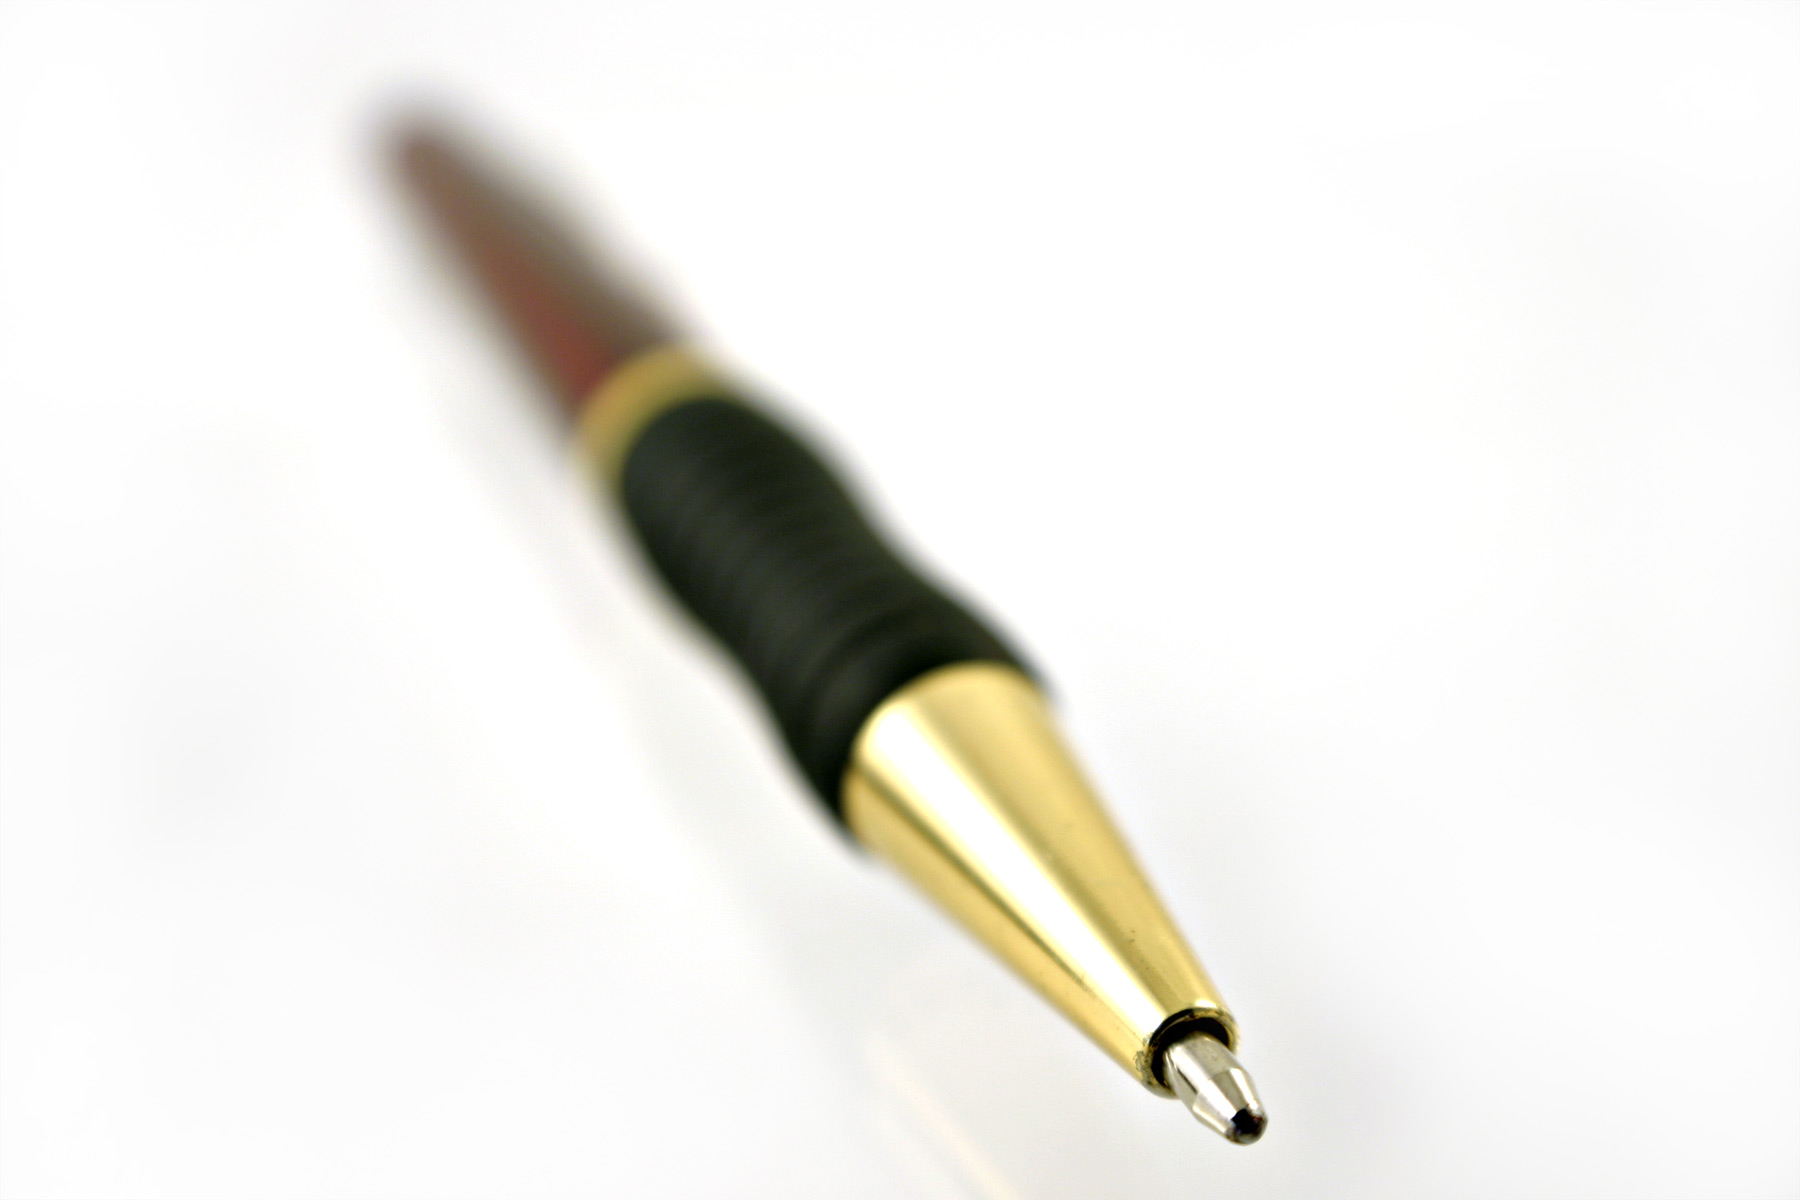 Red and golden pen out of focus photo